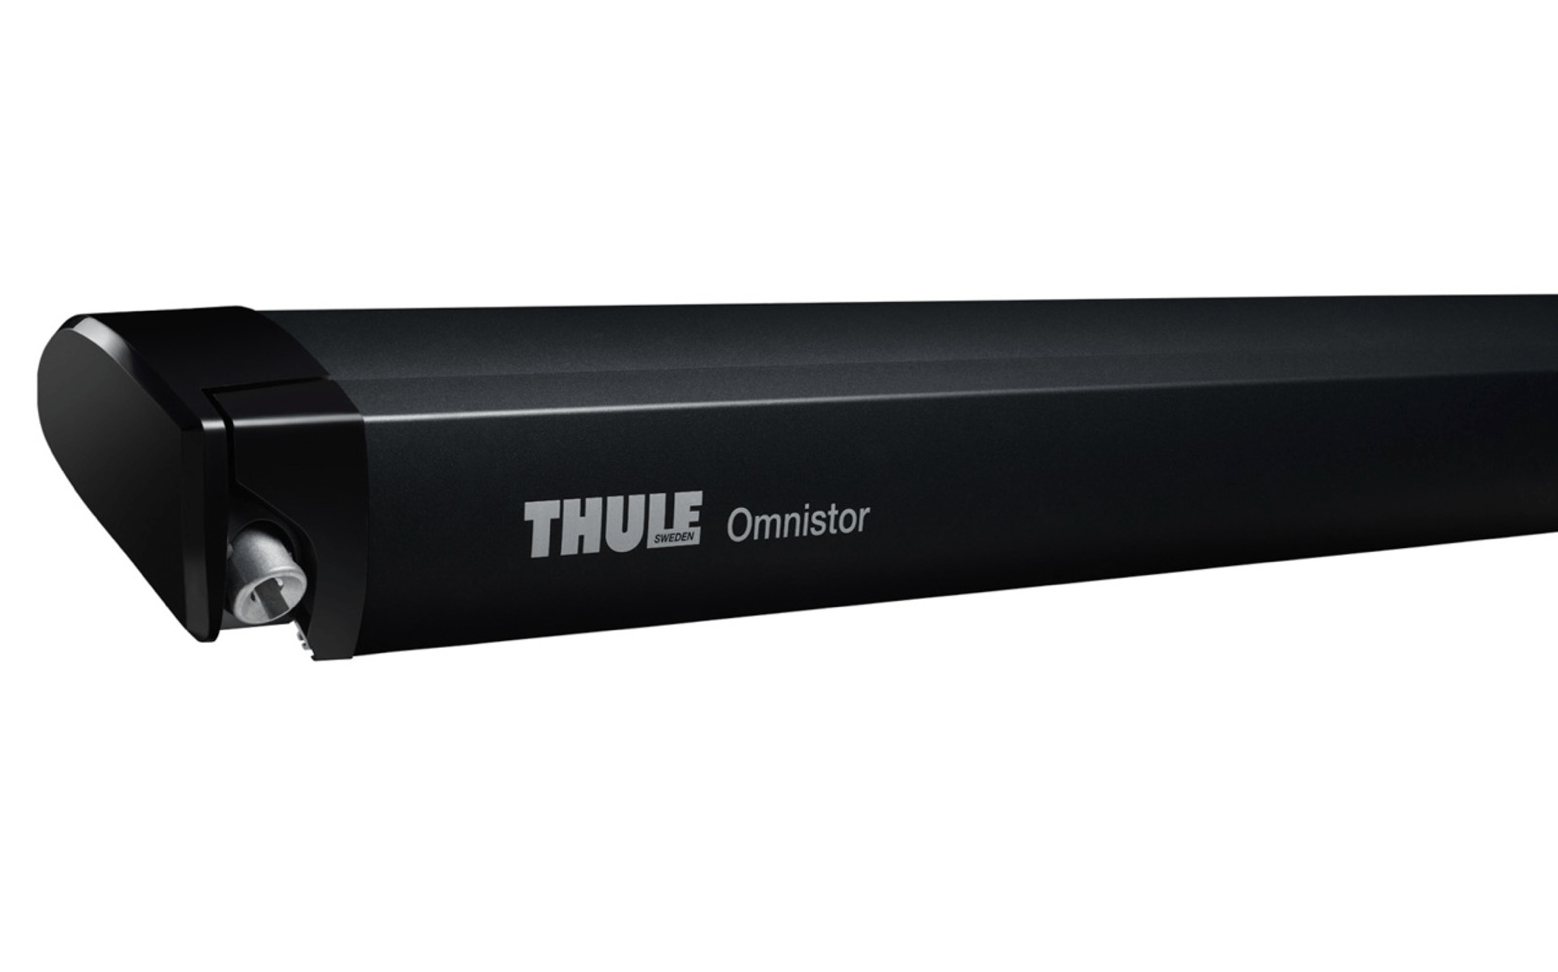 Thule Omnistor 4200 Awnings - Letang Auto Electrical Vehicle Parts